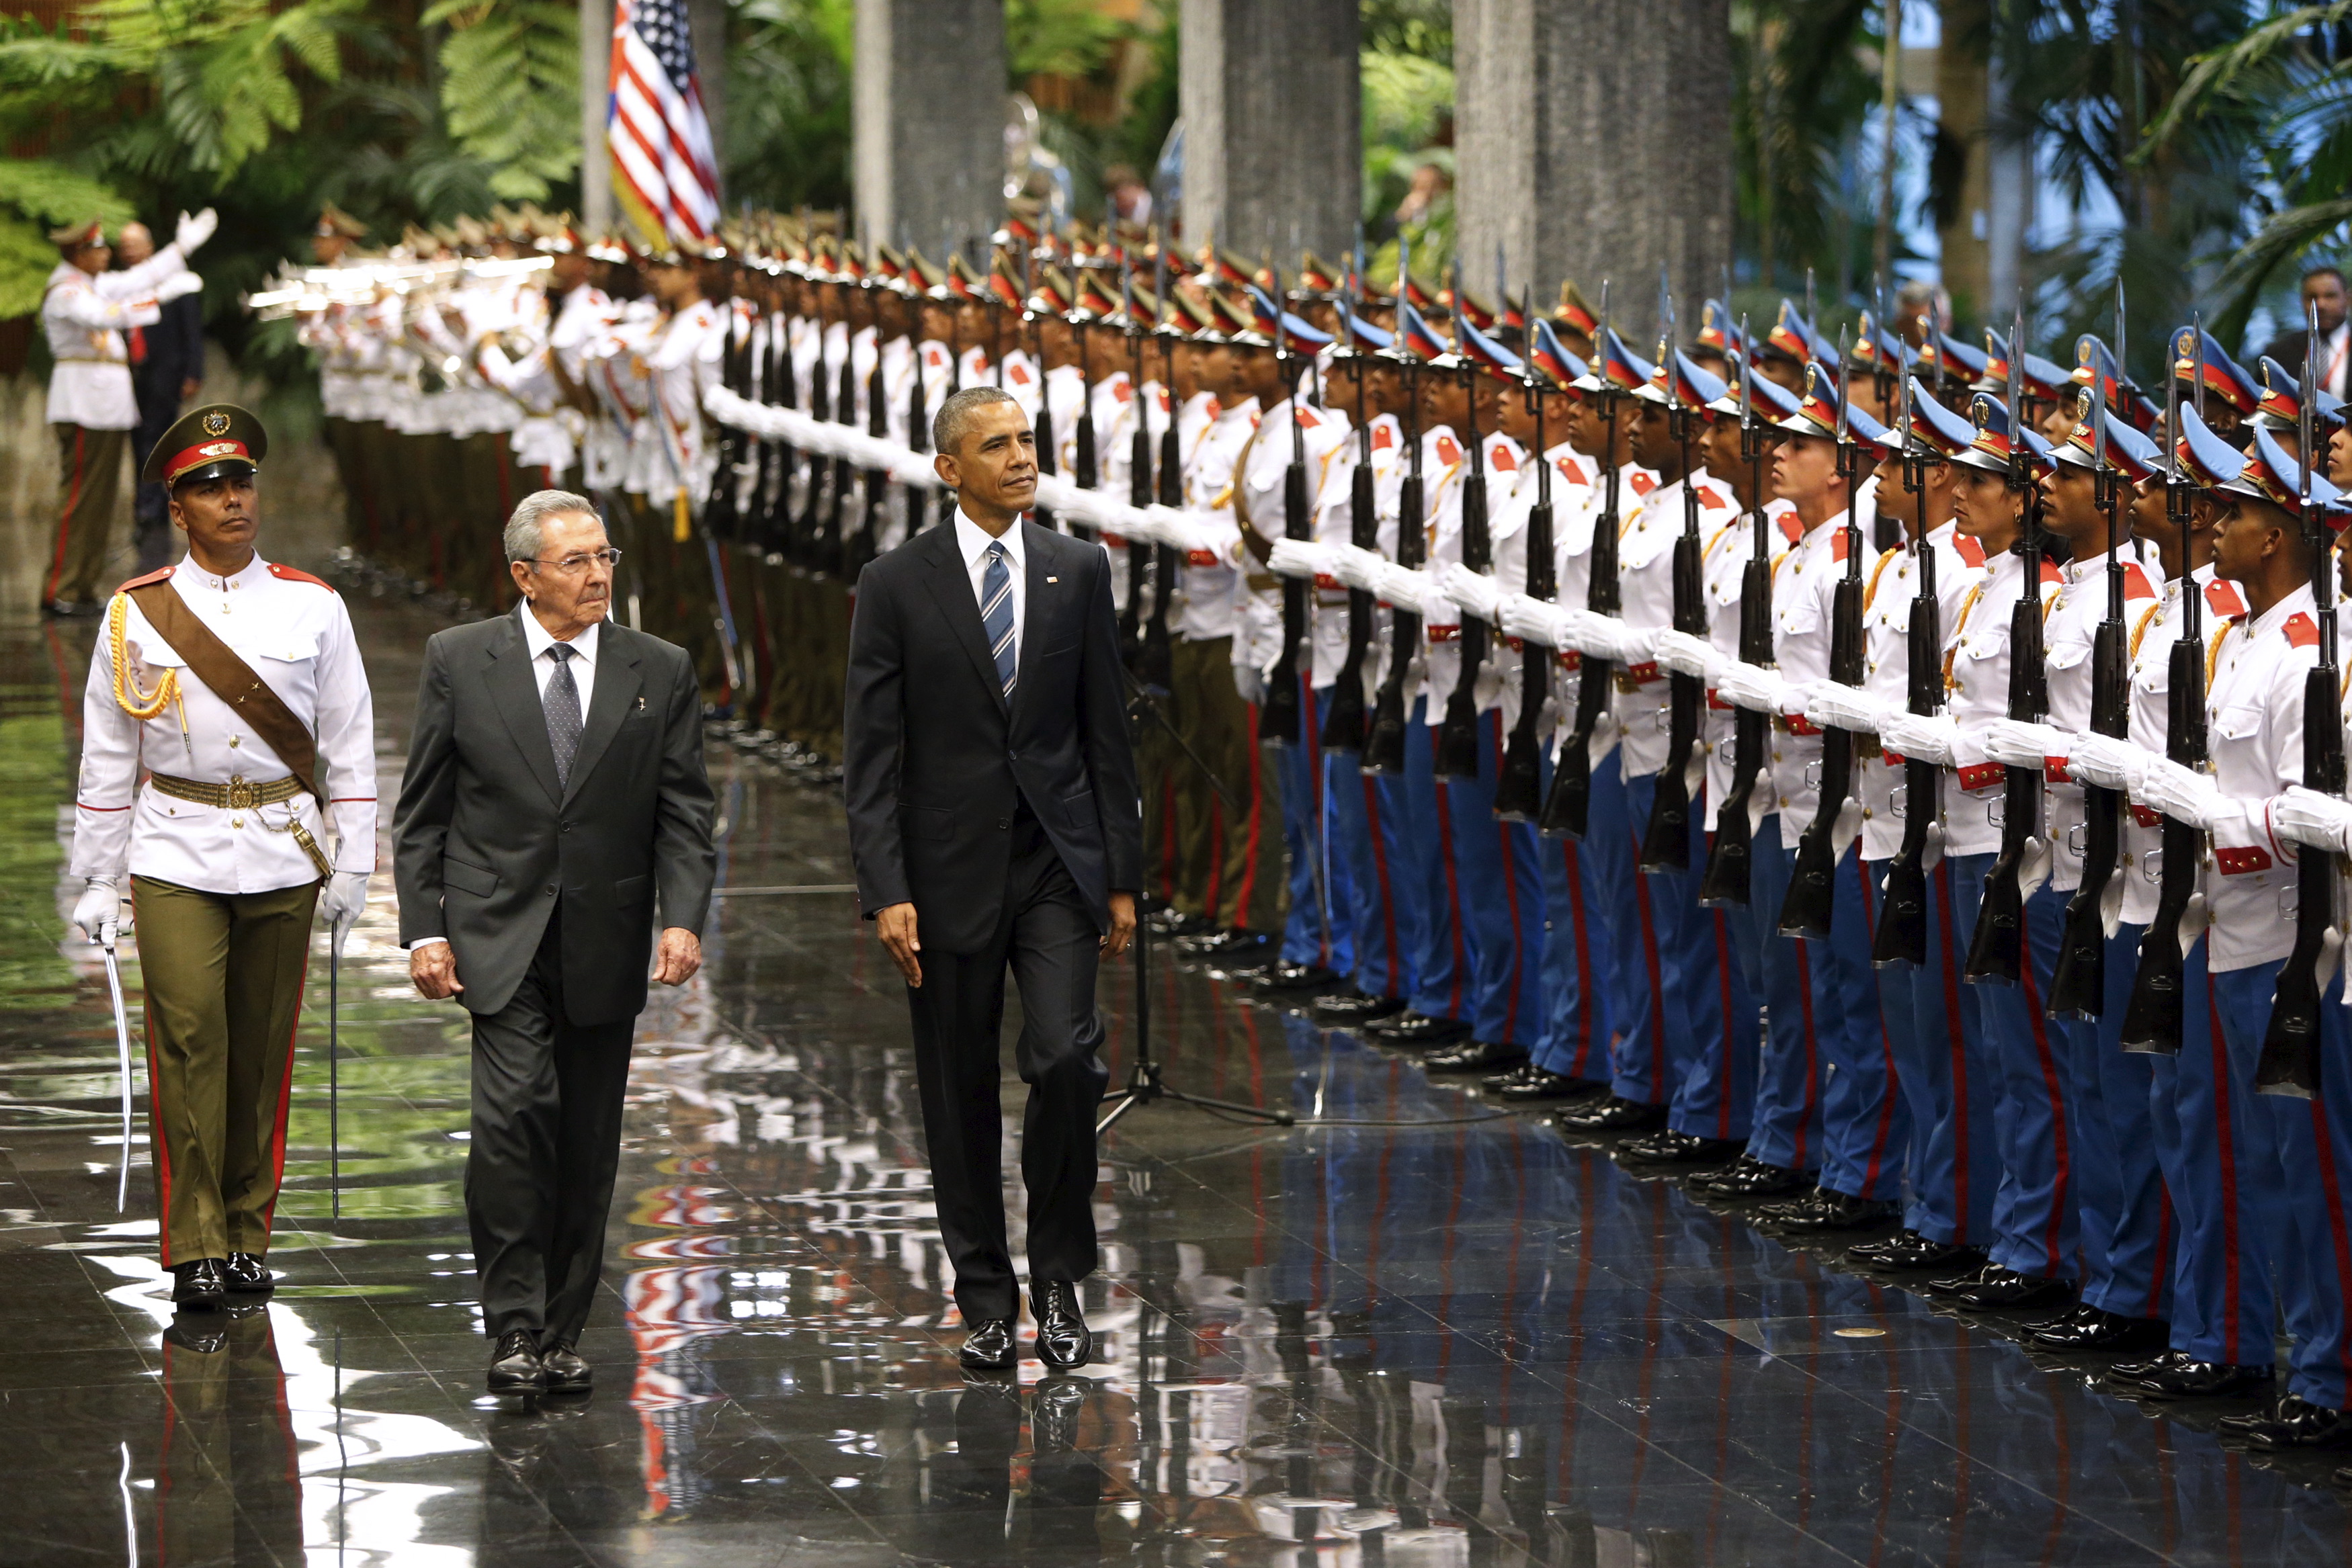 Can Cuba be more than an historic trip for Obama?